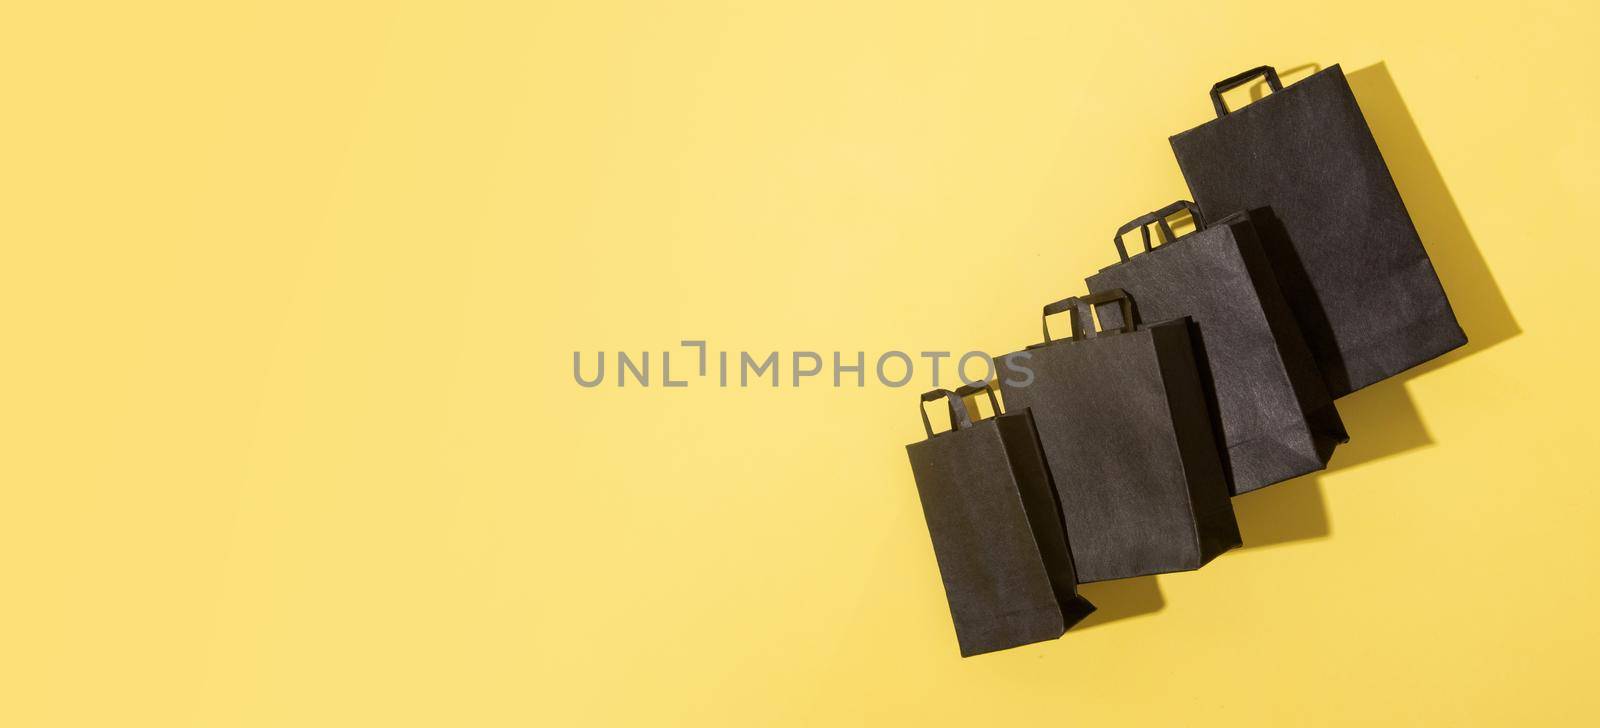 Black shopping bags on black friday sale yellow background with copy space. Banner format